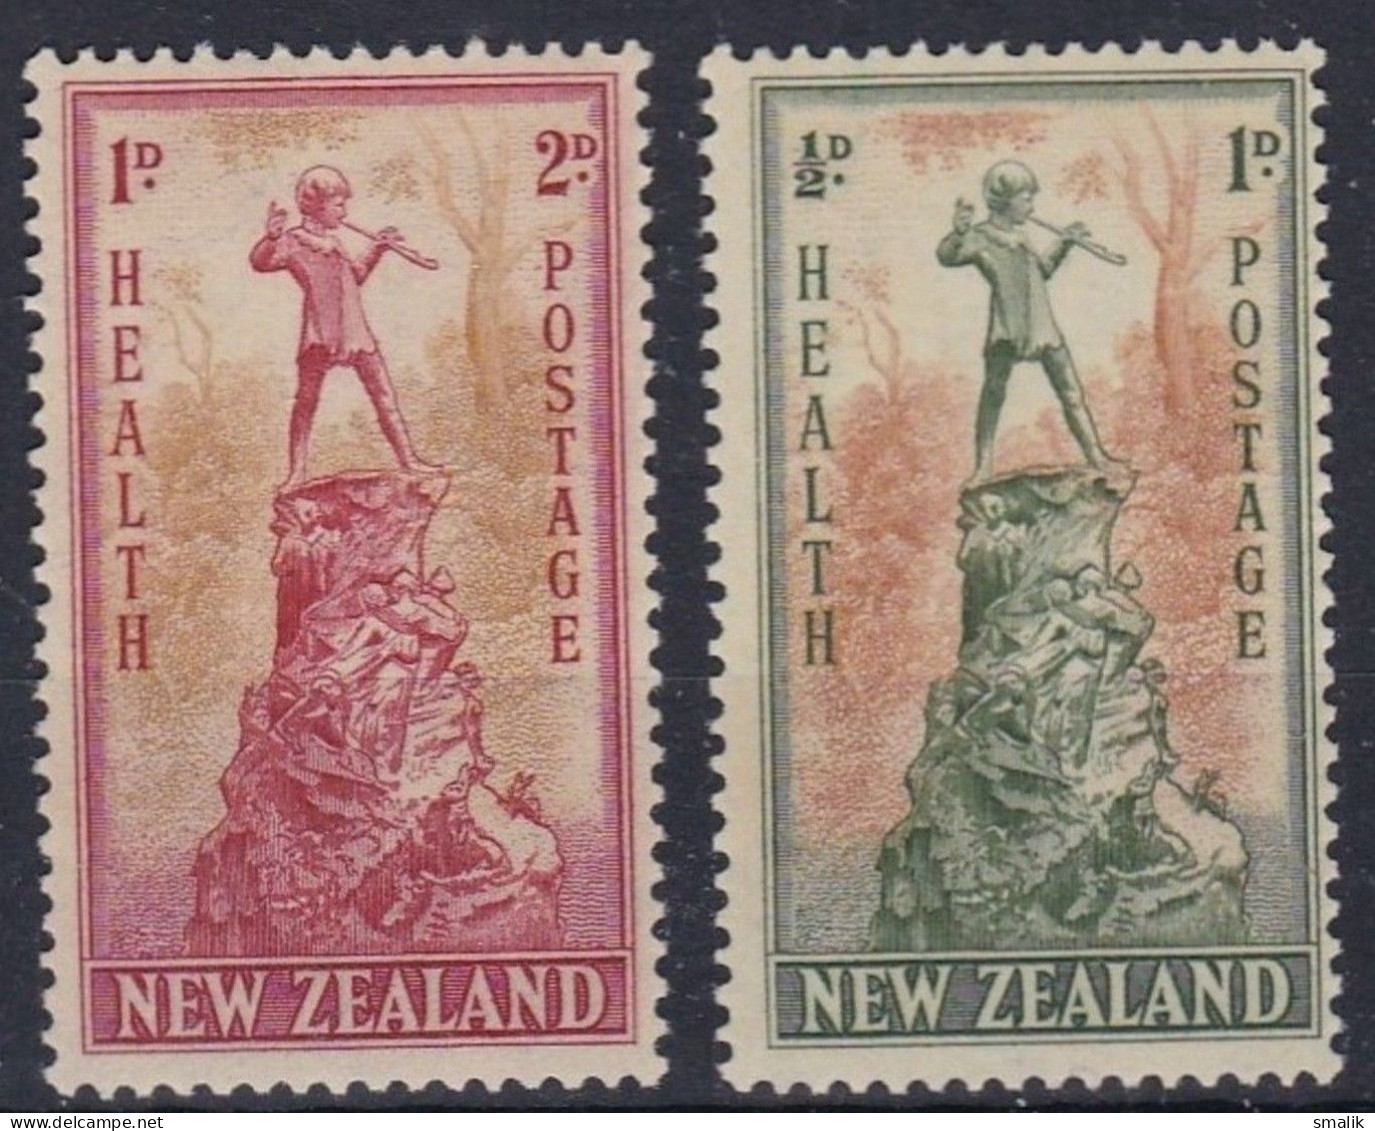 NEW ZEALAND 1945 - Health Surcharge, Peter Pan, Complete Set Of 2v. MNH - Nuevos